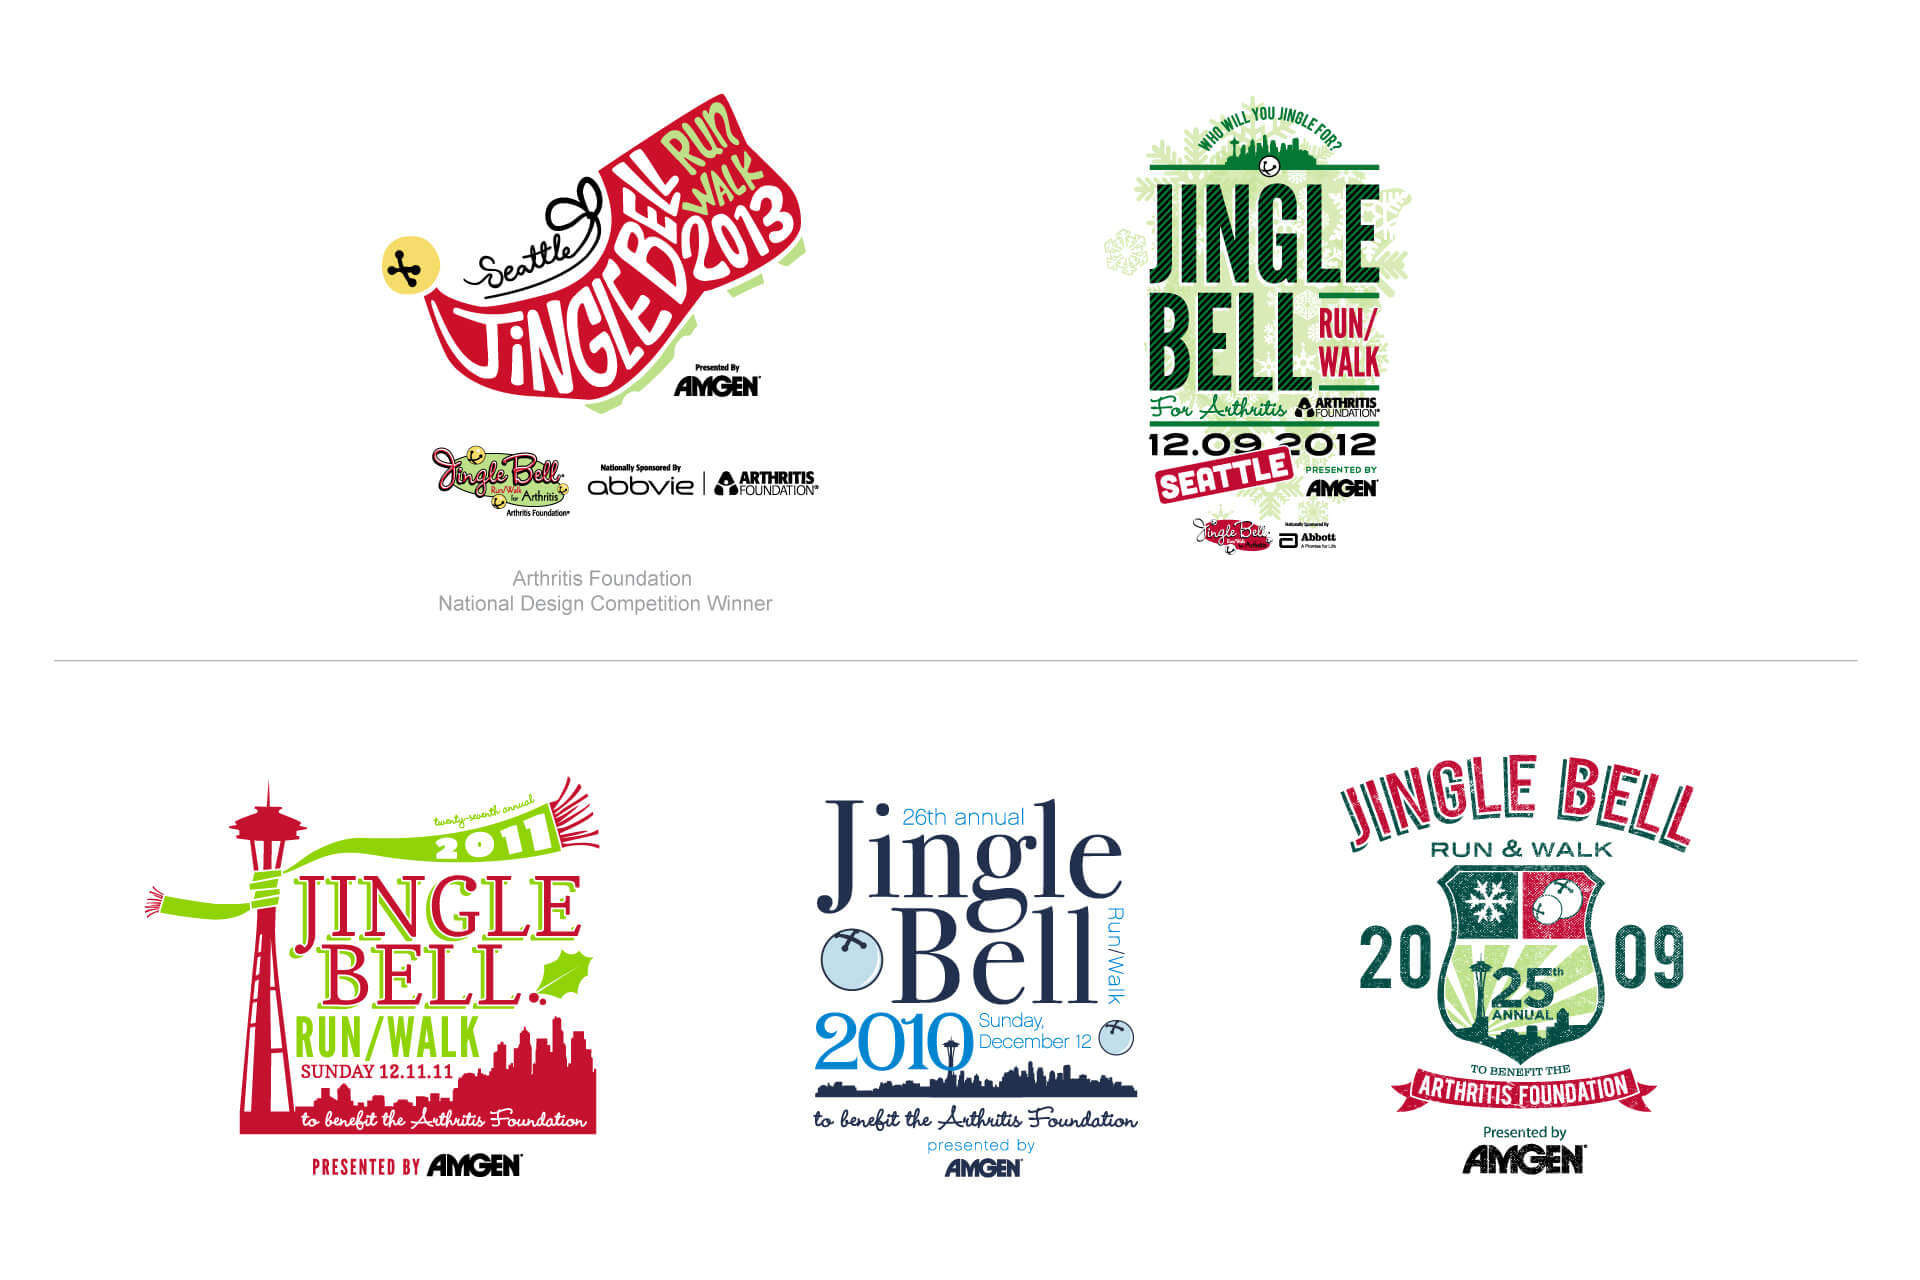 Jingle bell custom shirt designs from 2009 to 2013